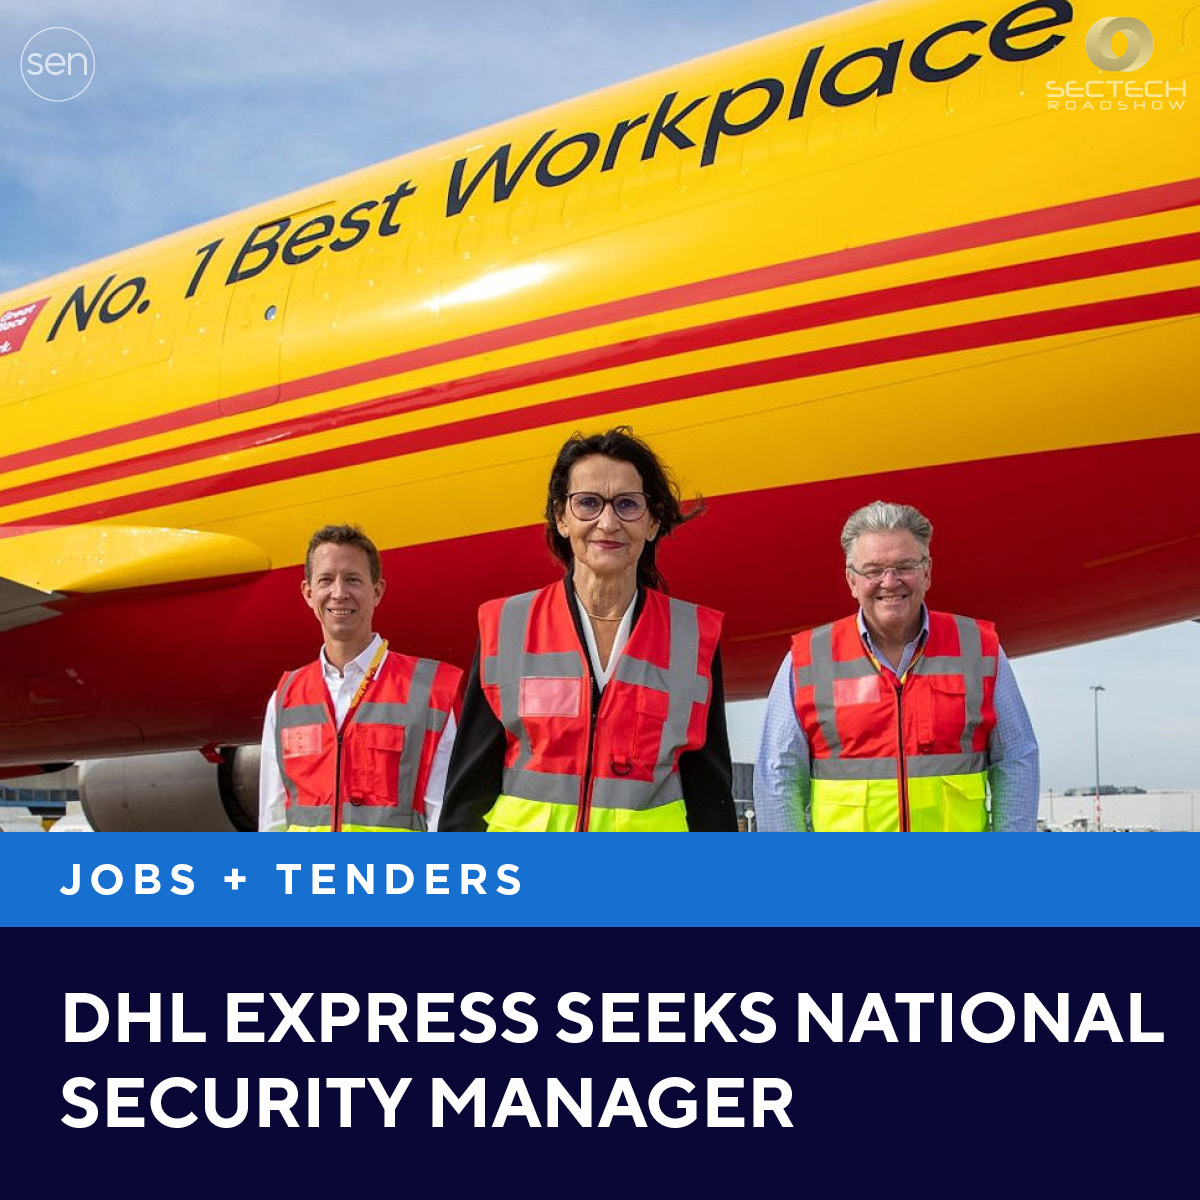 sen.news/dhl-express-se…
'DHL Express is offering its new national security manager a salary package of more than $A240,000.'
#securitymanagement #riskmanagement #facilitiesmanagement #securityconsulting #SEN